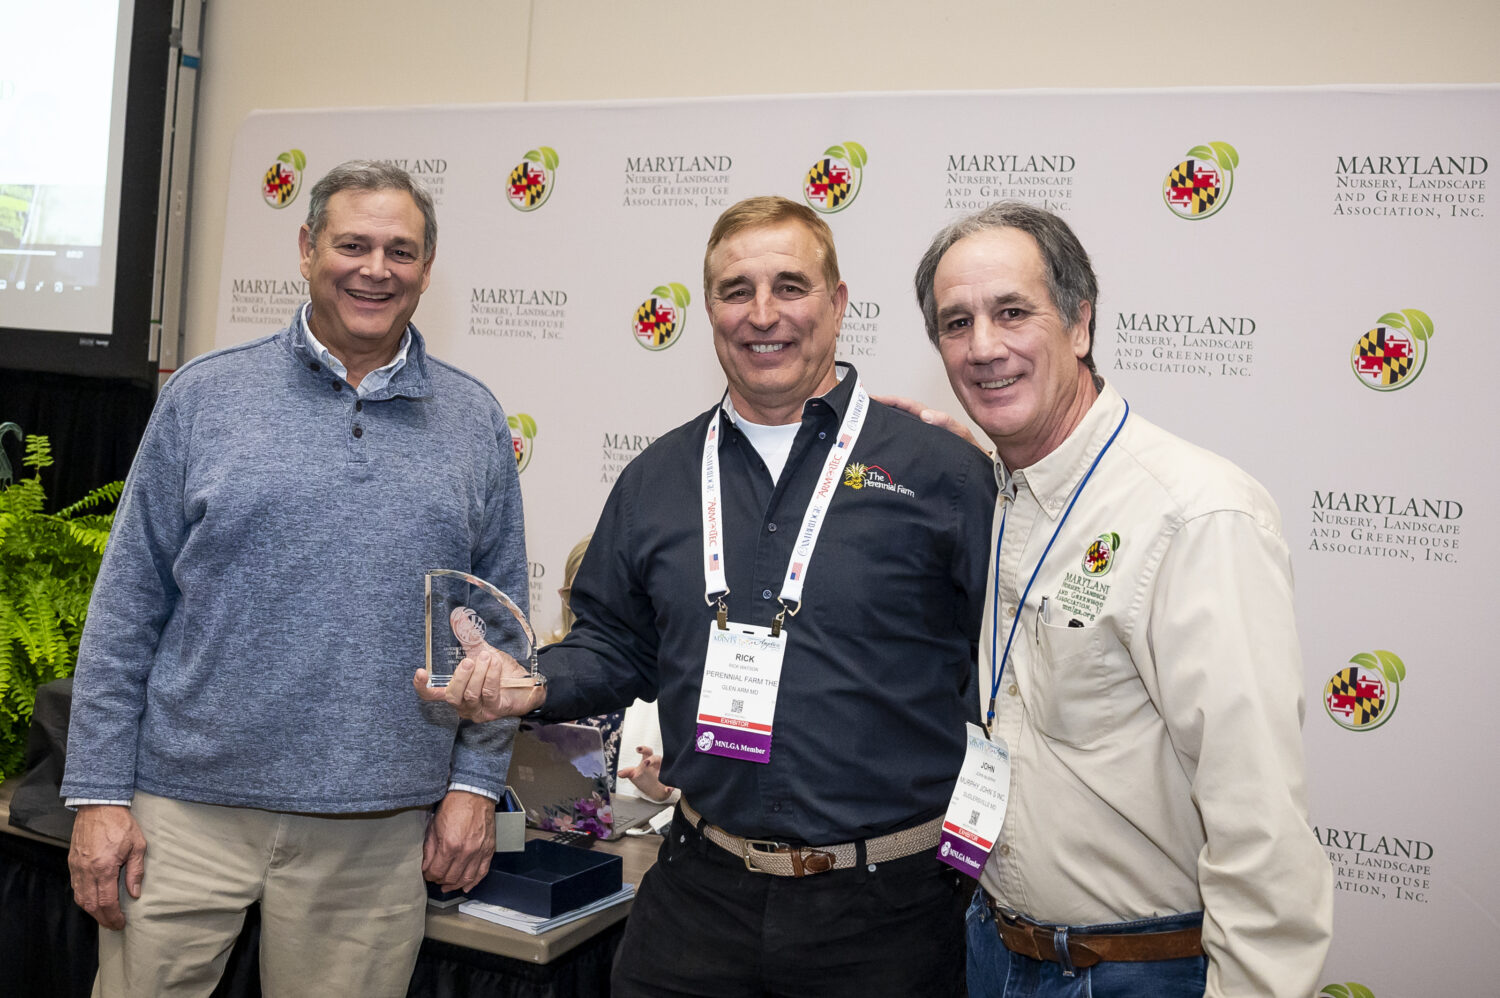 George May, executive director of the Maryland Ag Ed Foundation; Rick Watson, founder and president, The Perennial Farm; and John Murphy, owner Murphy John’s.